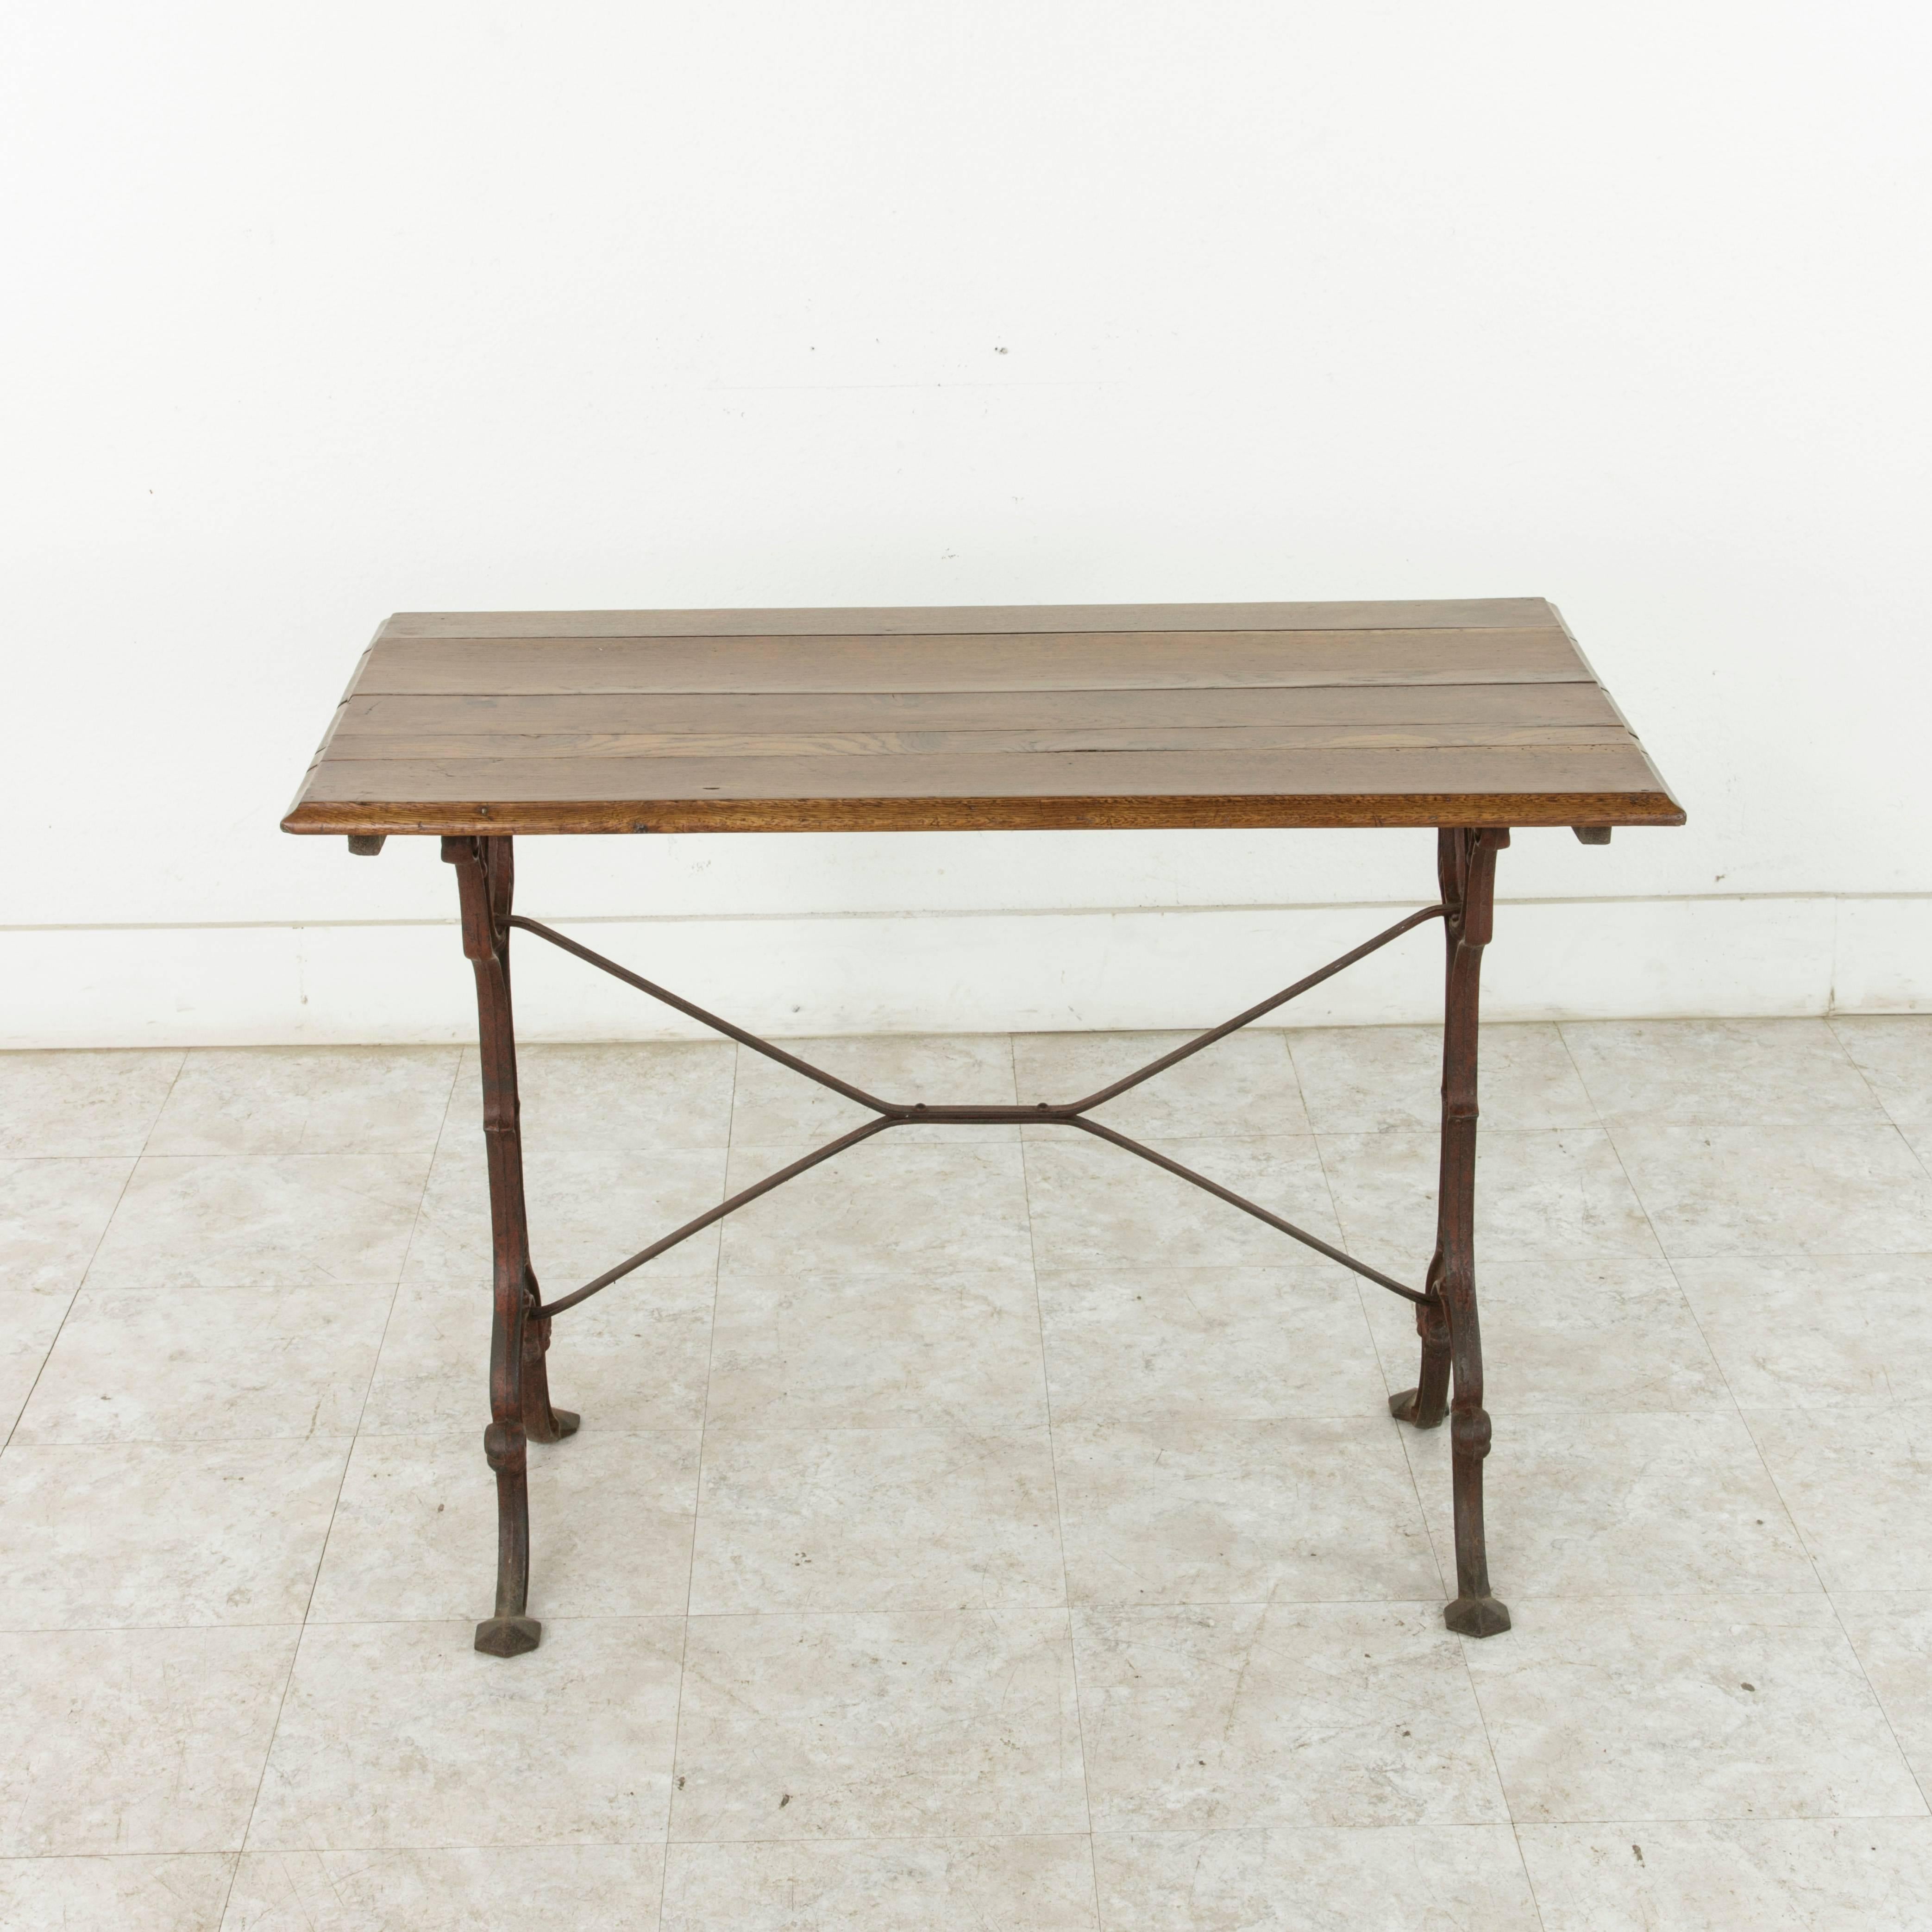 Originally used in a French brasserie around the turn of the 20th century, this bistro table or cafe table features a cast iron base and a beveled oak top. Classic scrolled iron legs are joined by an X-stretcher that provides additional stability to